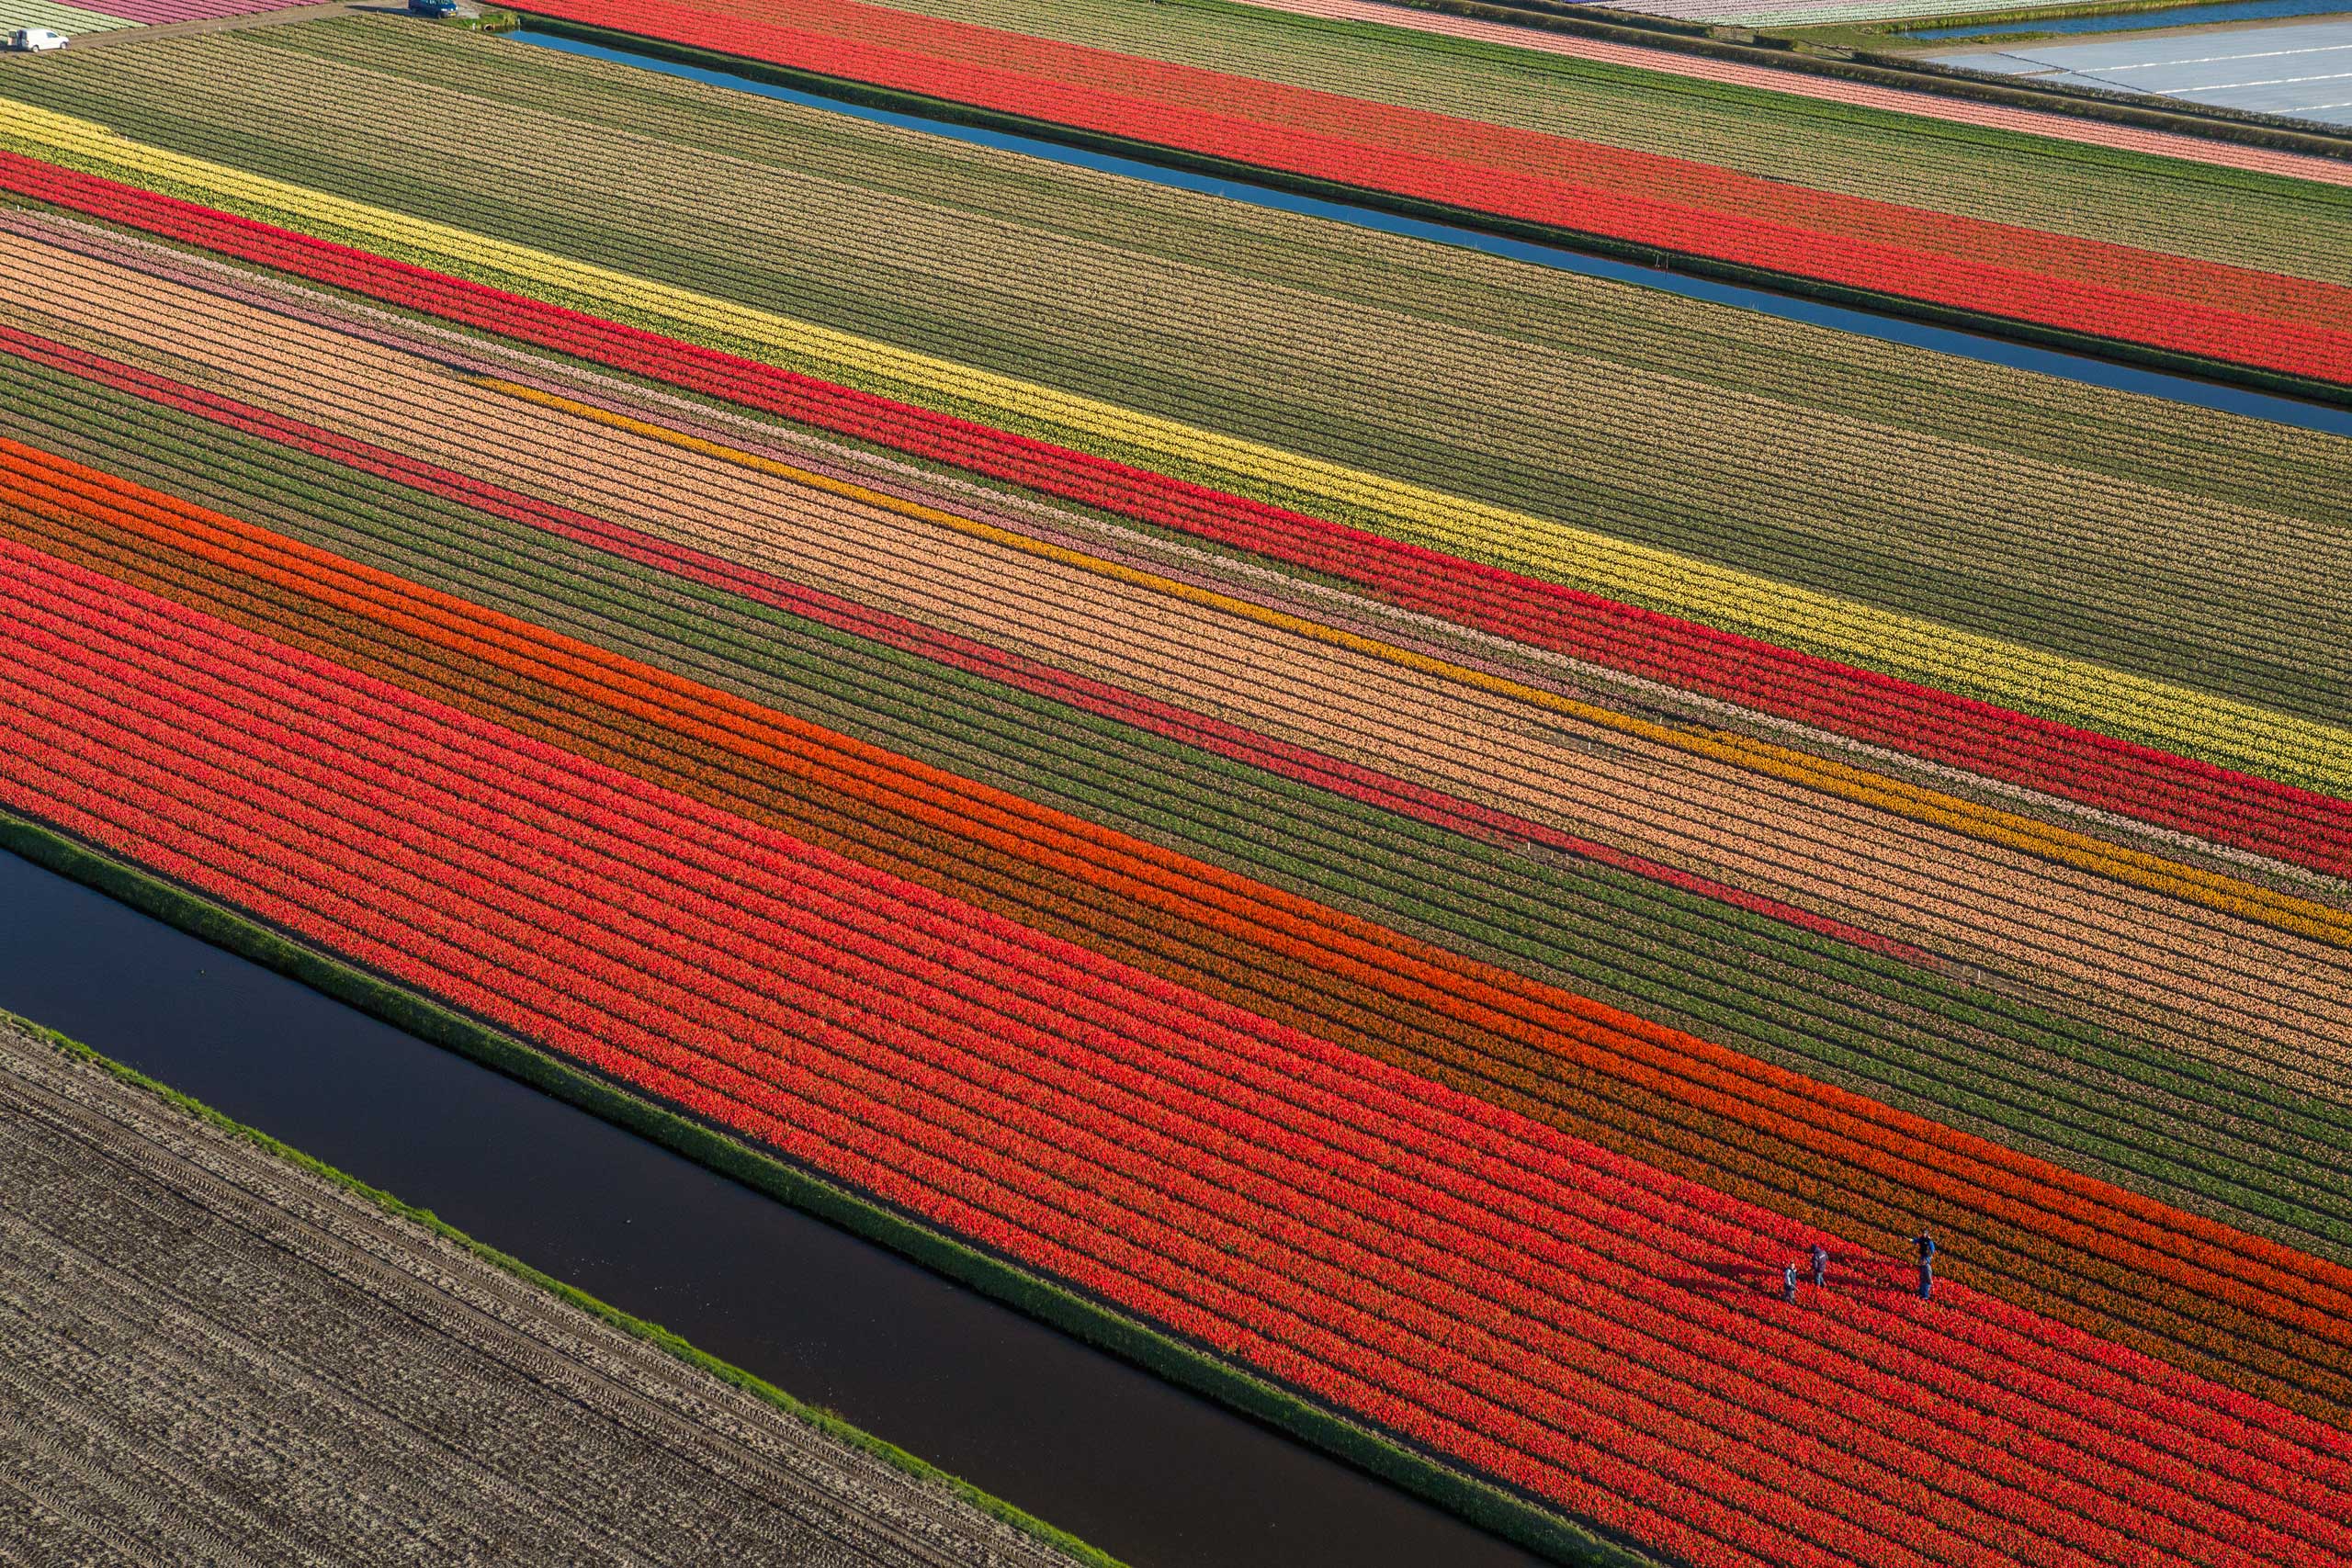 Tulips blooming in fields between Amsterdam and Leiden, The Netherlands.